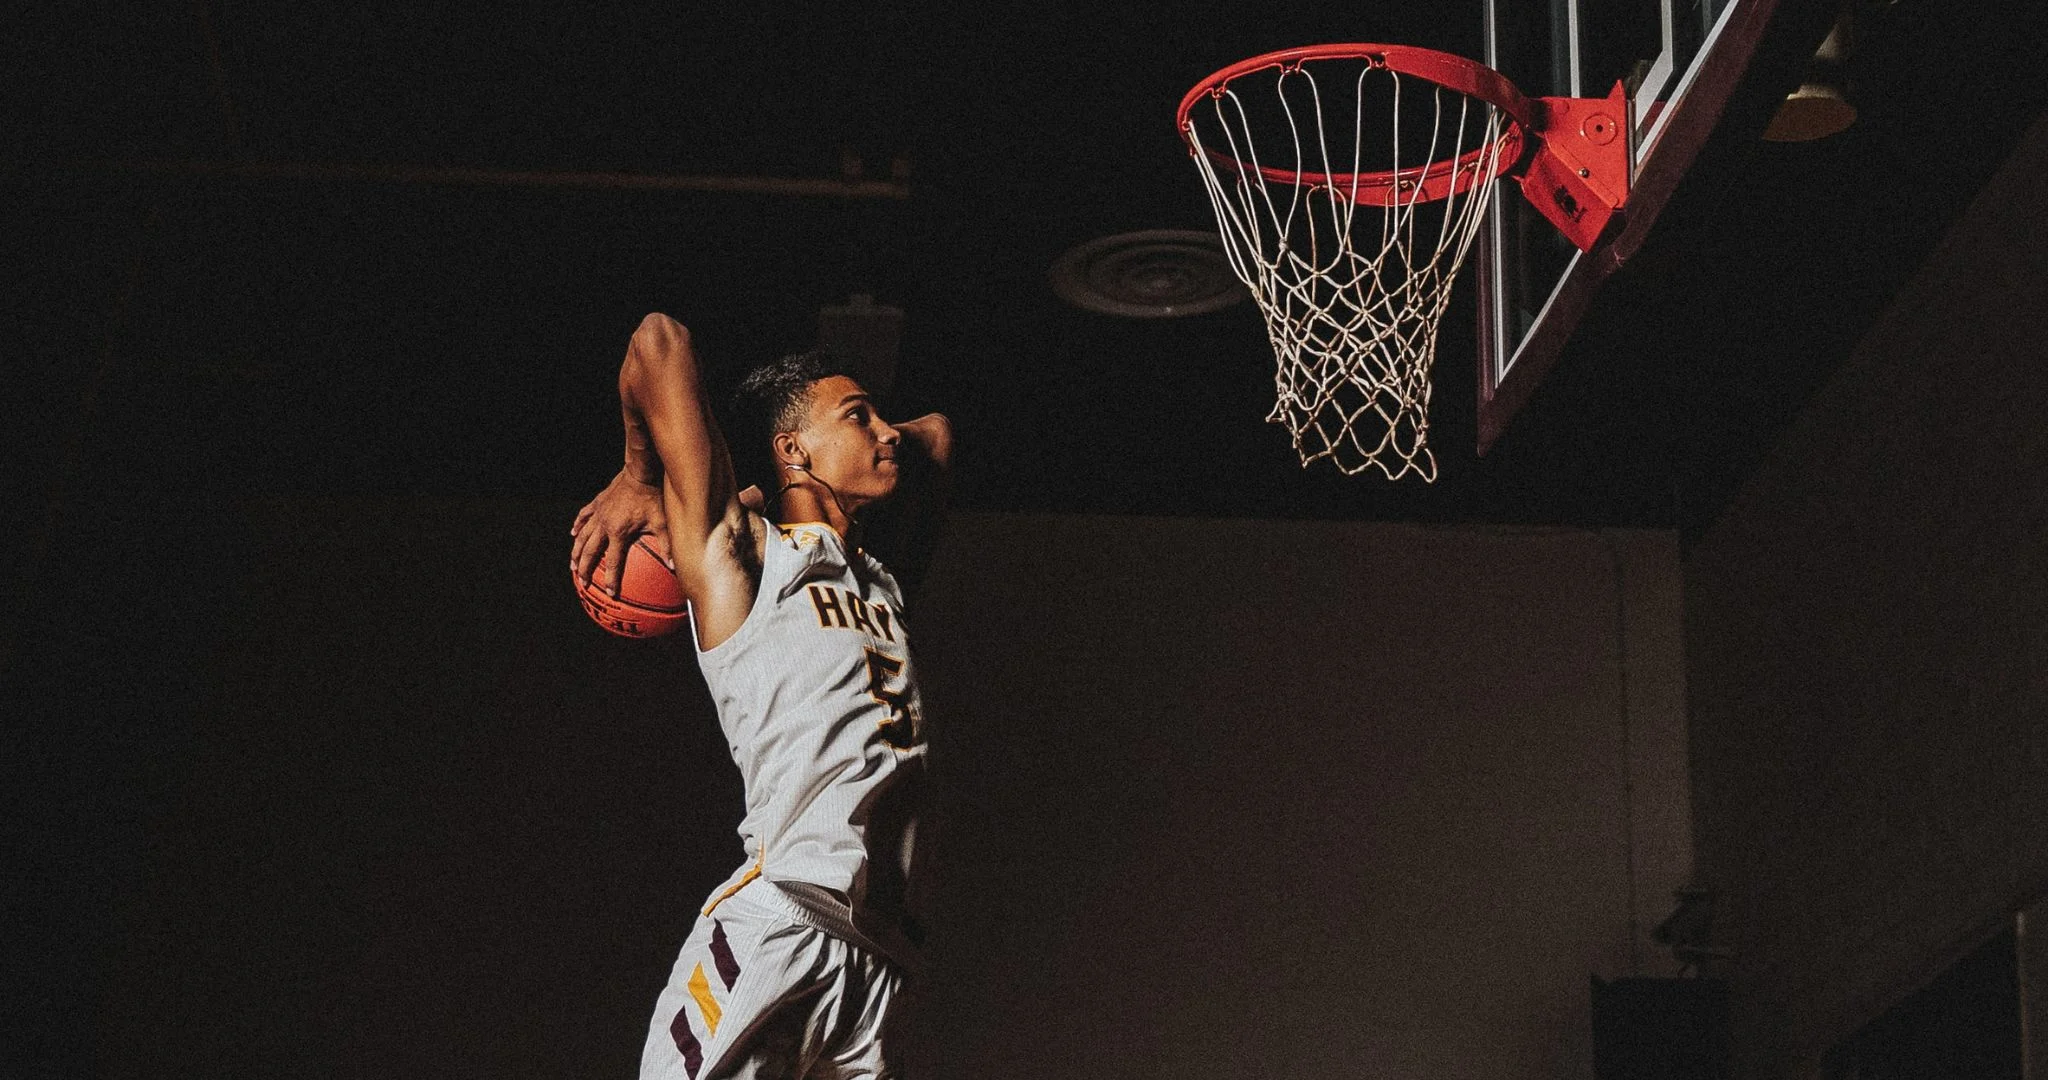 A basketball player one split second before a slam dunk. Source: August Phliege / Unsplash